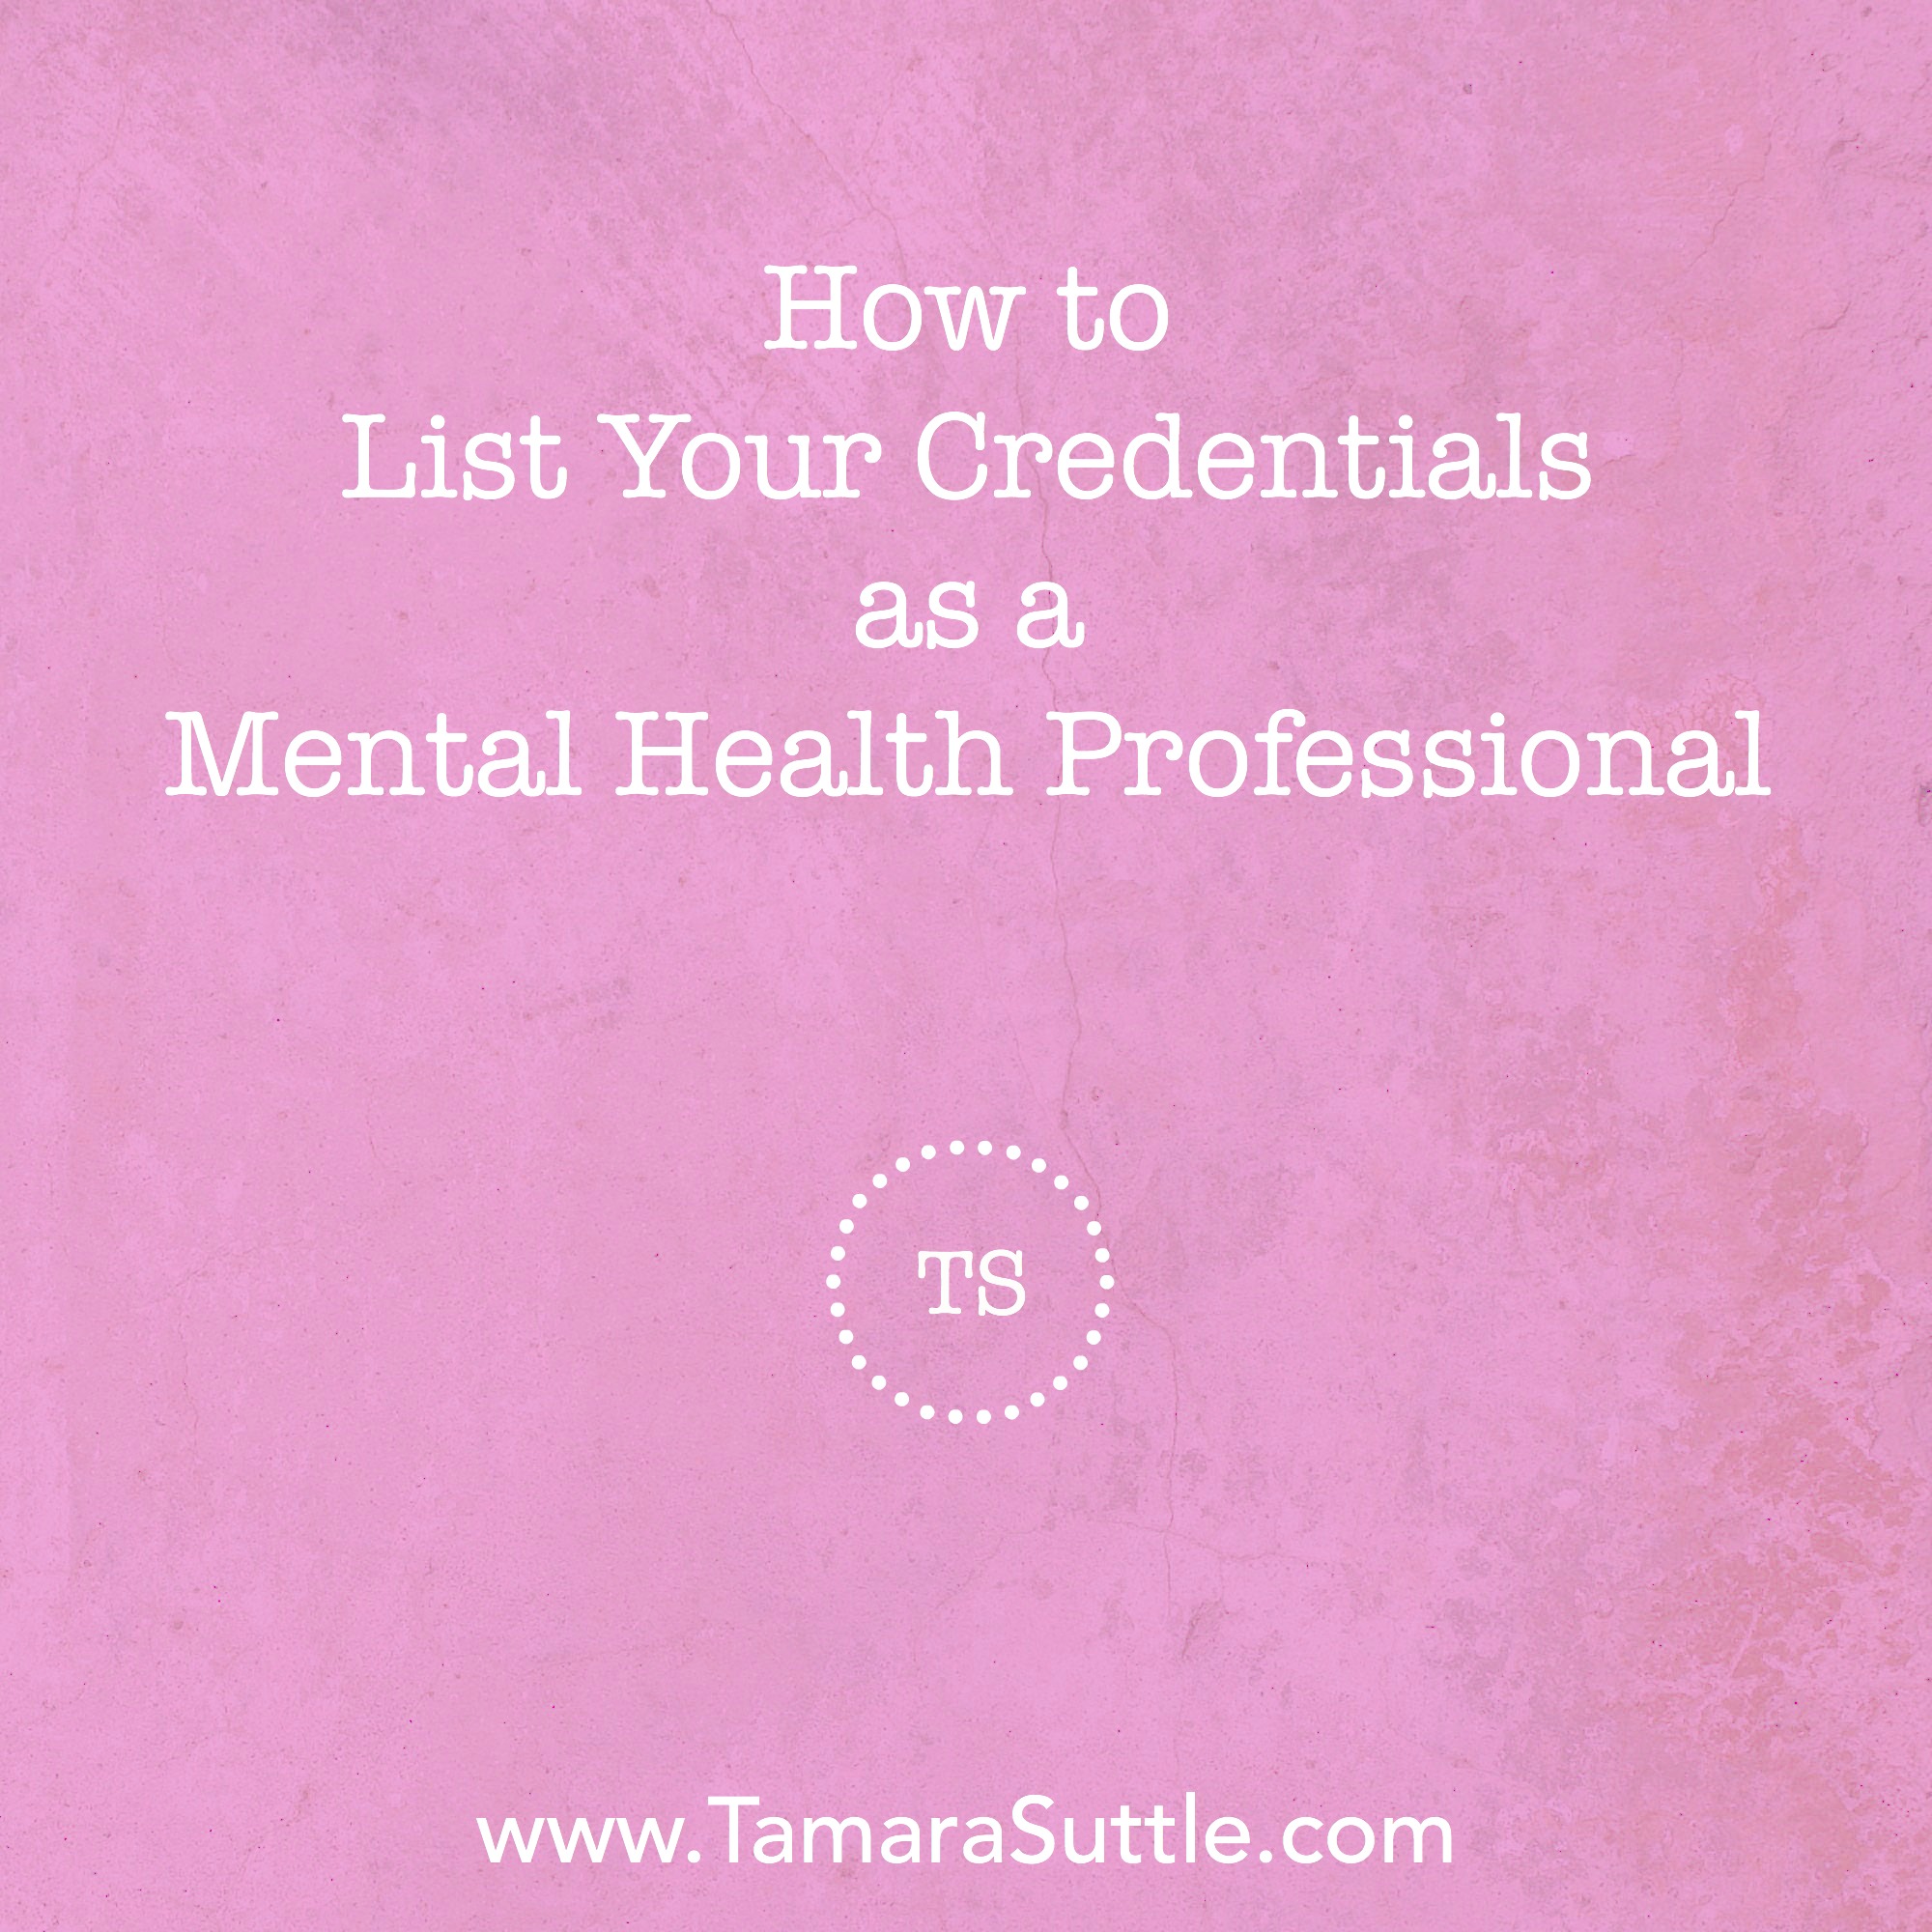 How To List Your Credentials As A Mental Health Professional